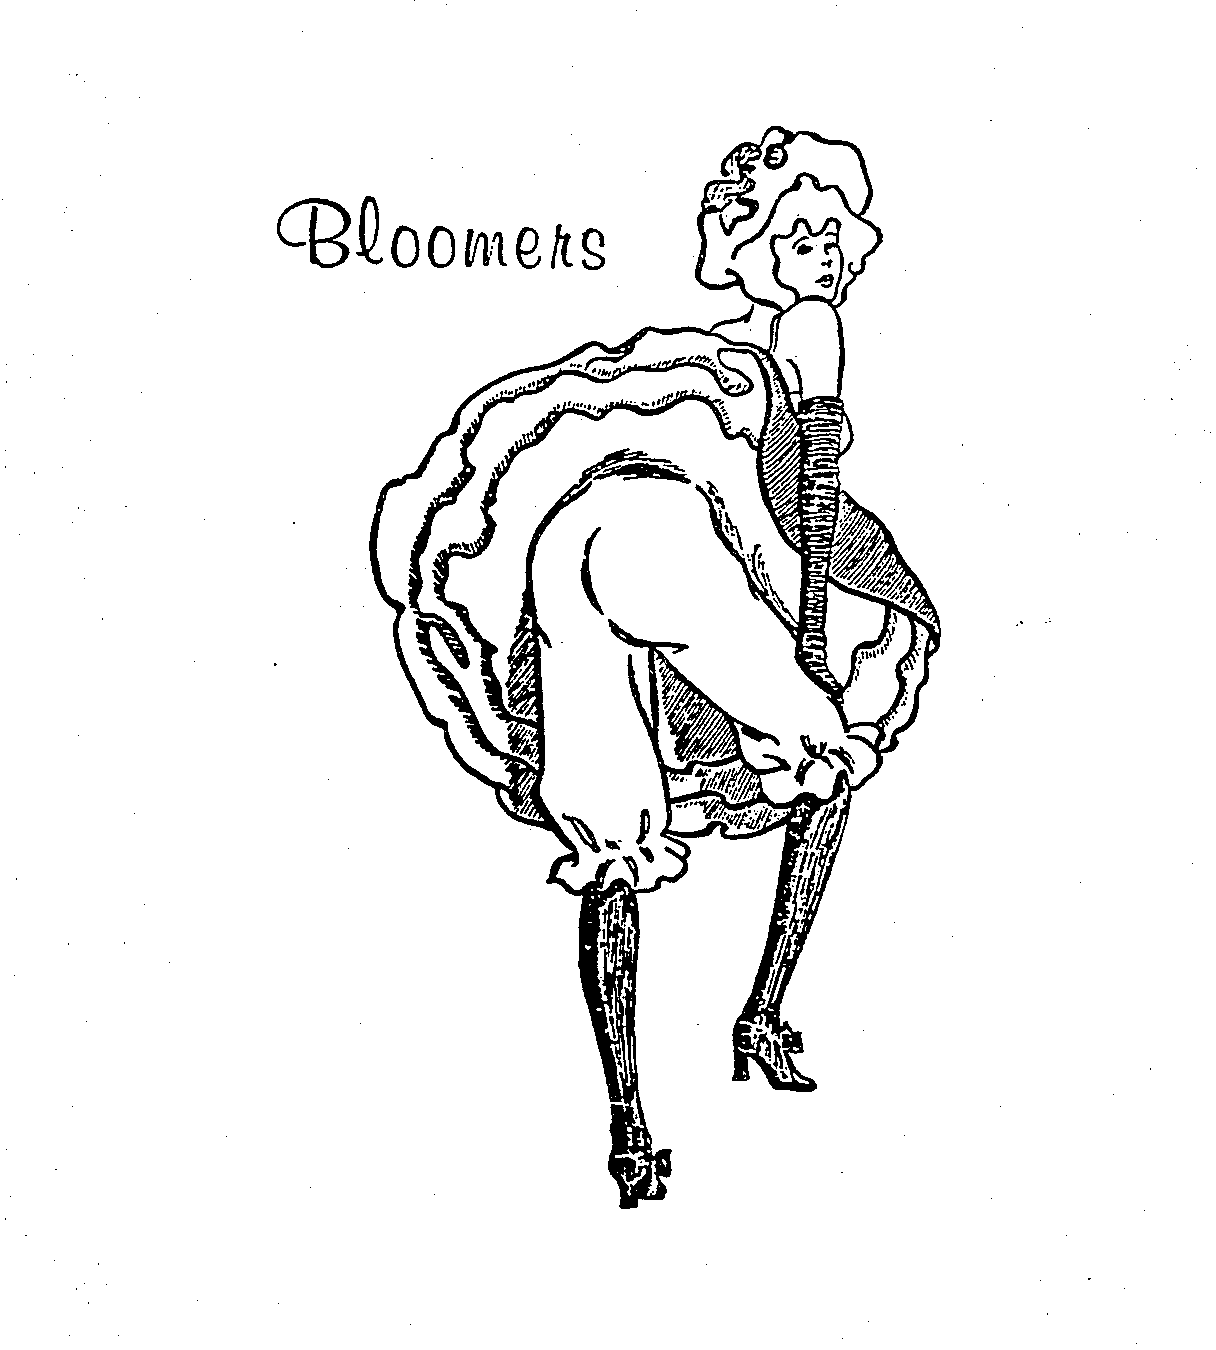 BLOOMERS